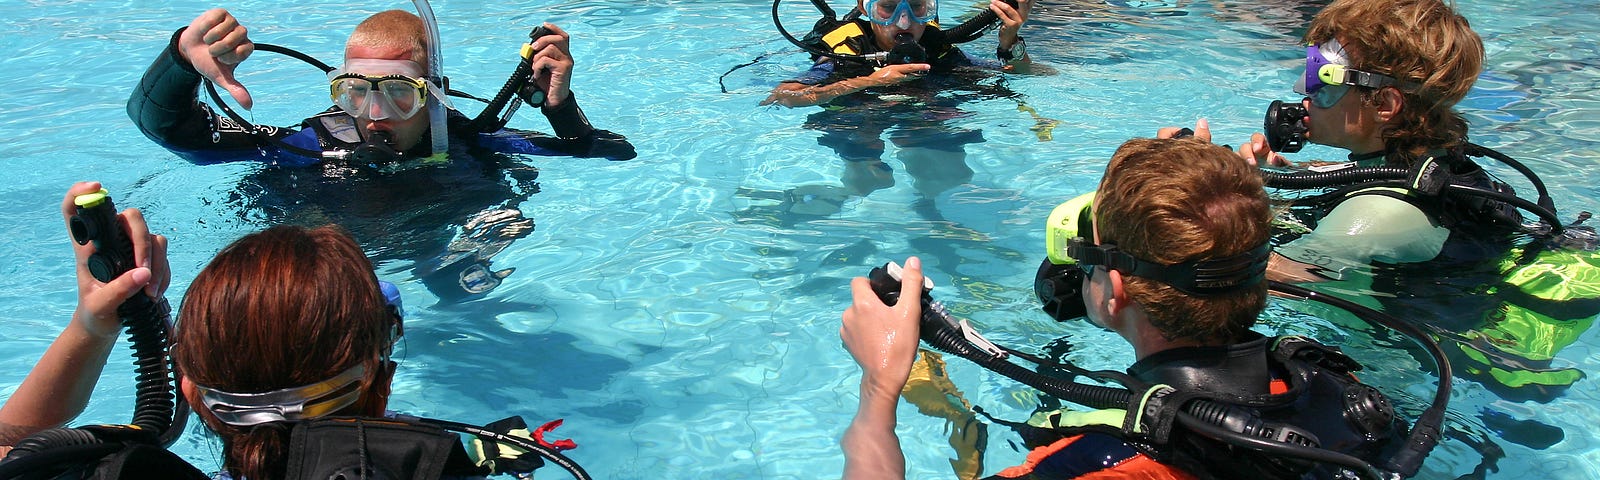 A scuba diving instructor leading a class in pool exercises.